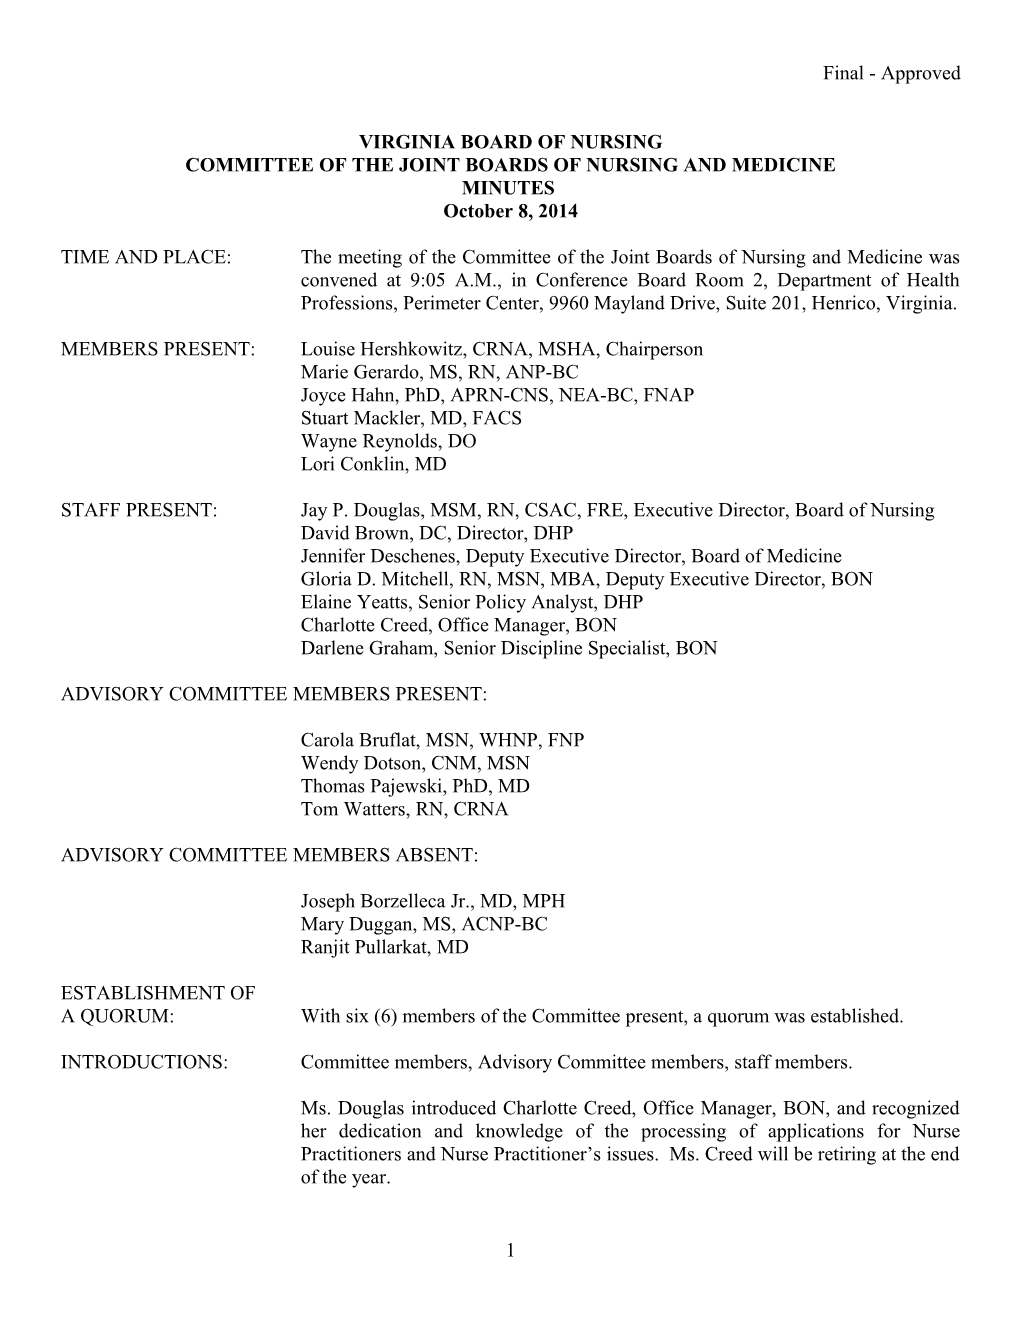 Committee of the Joint Boards of Nursing and Medicine